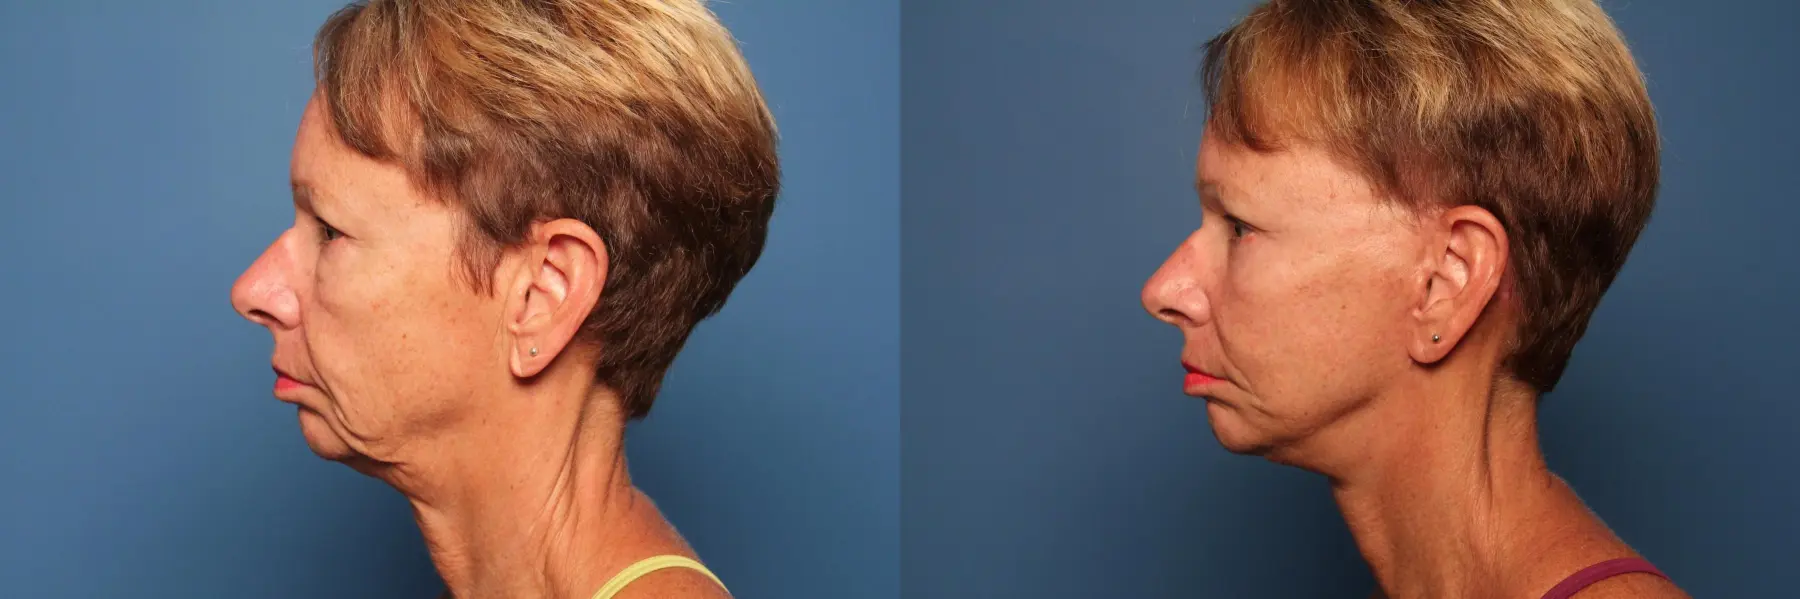 Mini Facelift: Patient 4 - Before and After 3